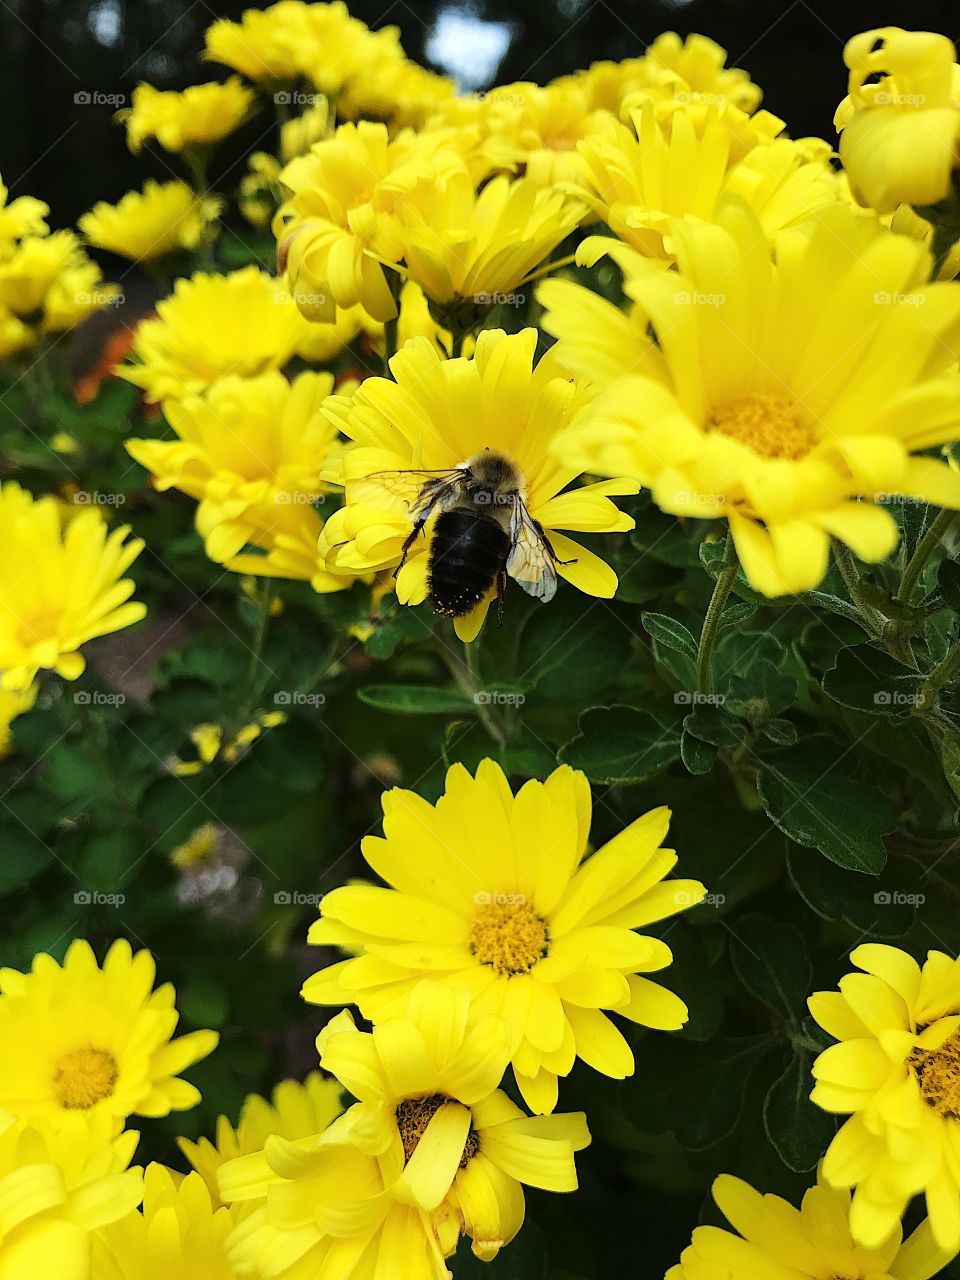 A bright yellow shot of a bumblebee collecting pollen in a group of flowers from a garden in summer